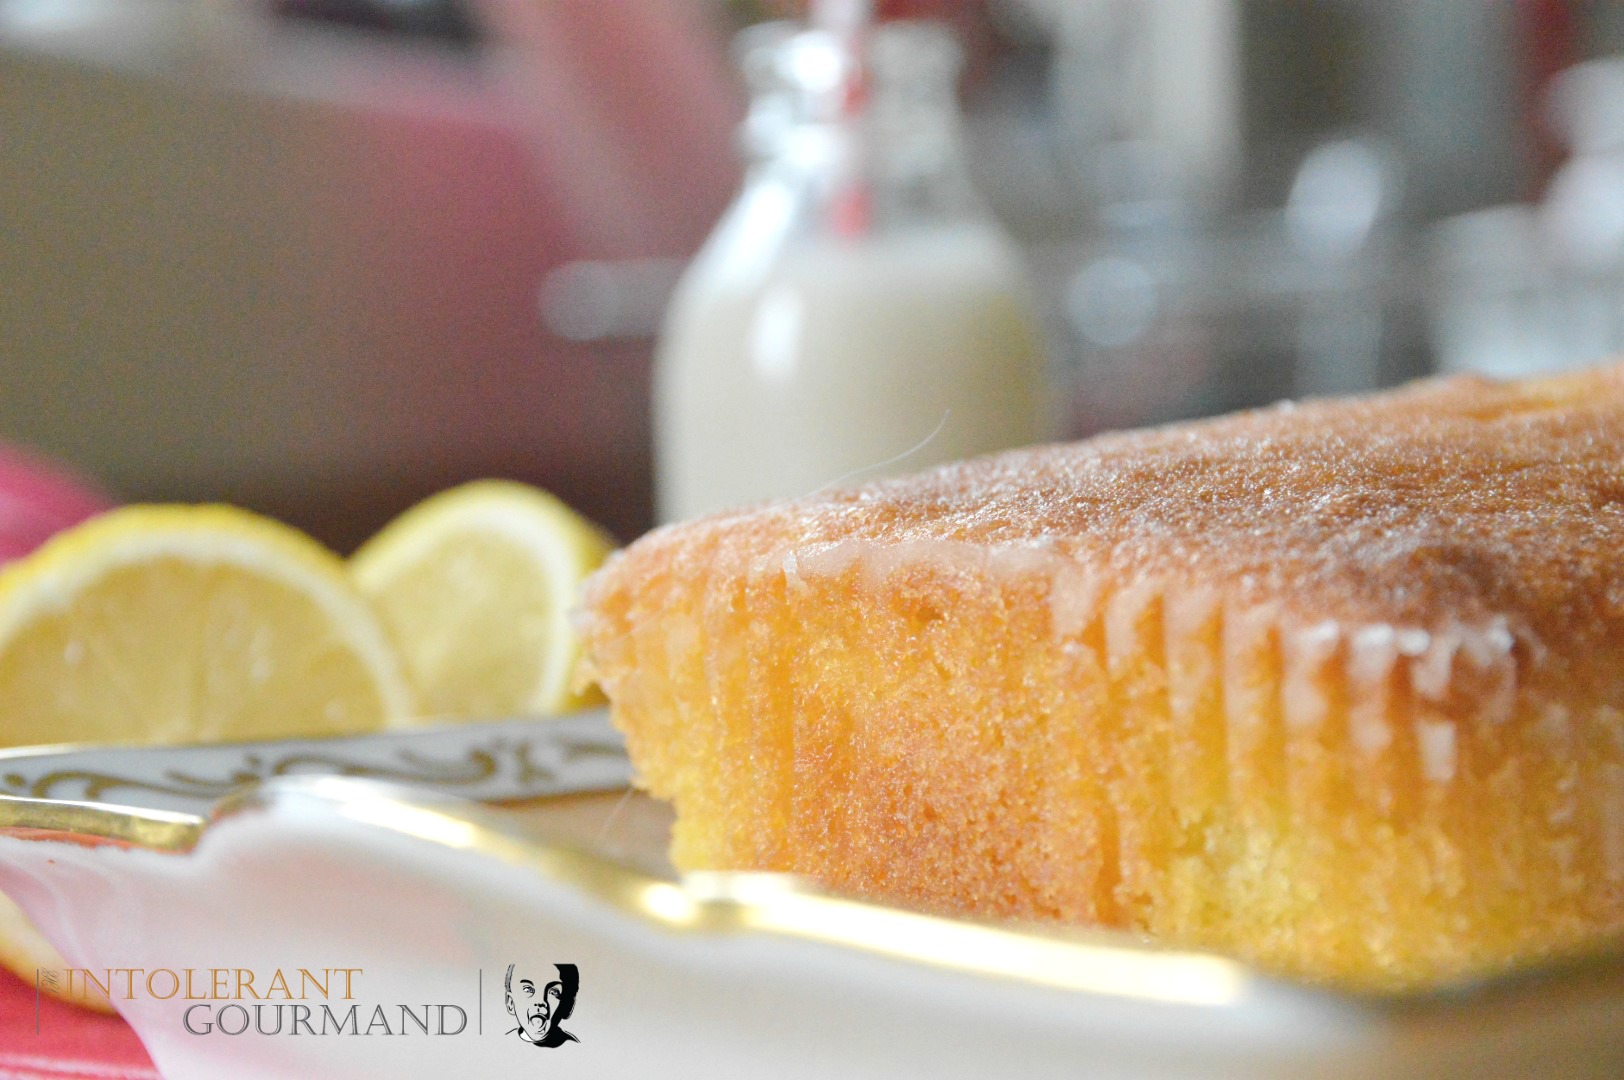 Gluten free dairy free lemon drizzle cake - a delicious light sponge, made with Free From Fairy flour www.intolerantgourmand.com